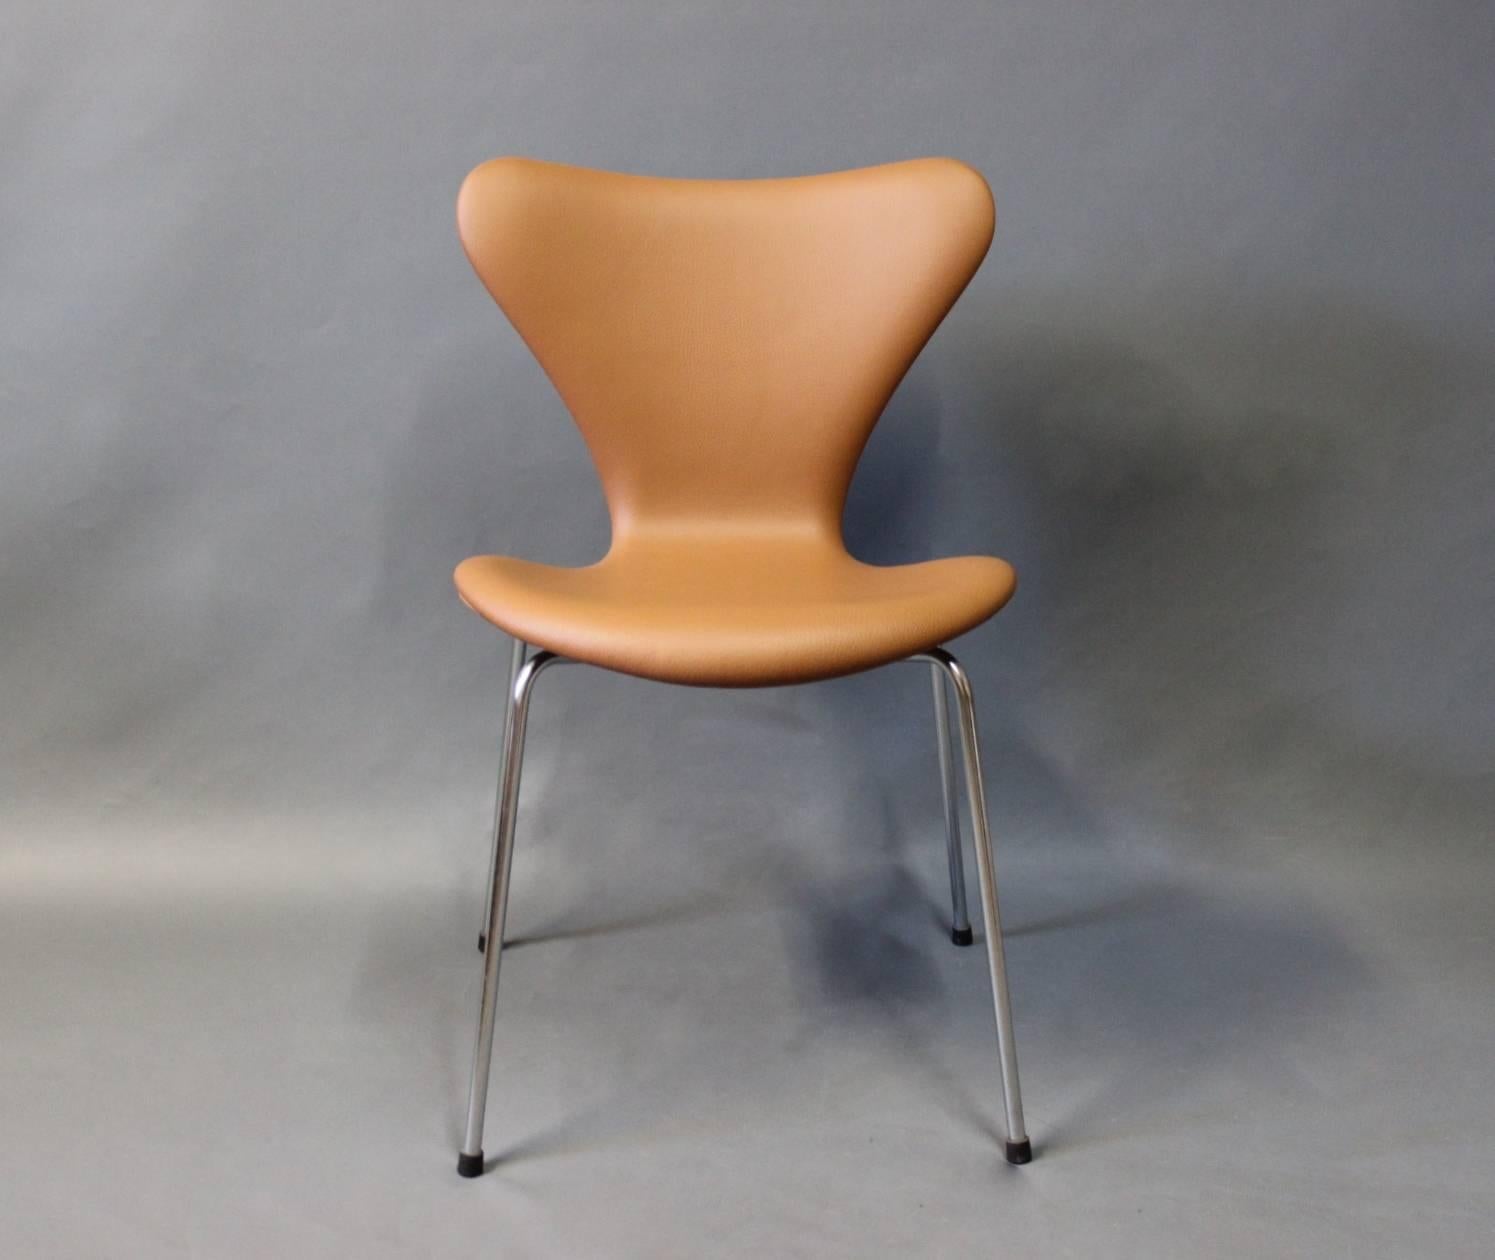 A set of four seven chairs designed by Arne Jacobsen in 1955 and manufactured by Fritz Hansen in 1967. The chairs have recently been upholstered with cognac colored Classic leather.